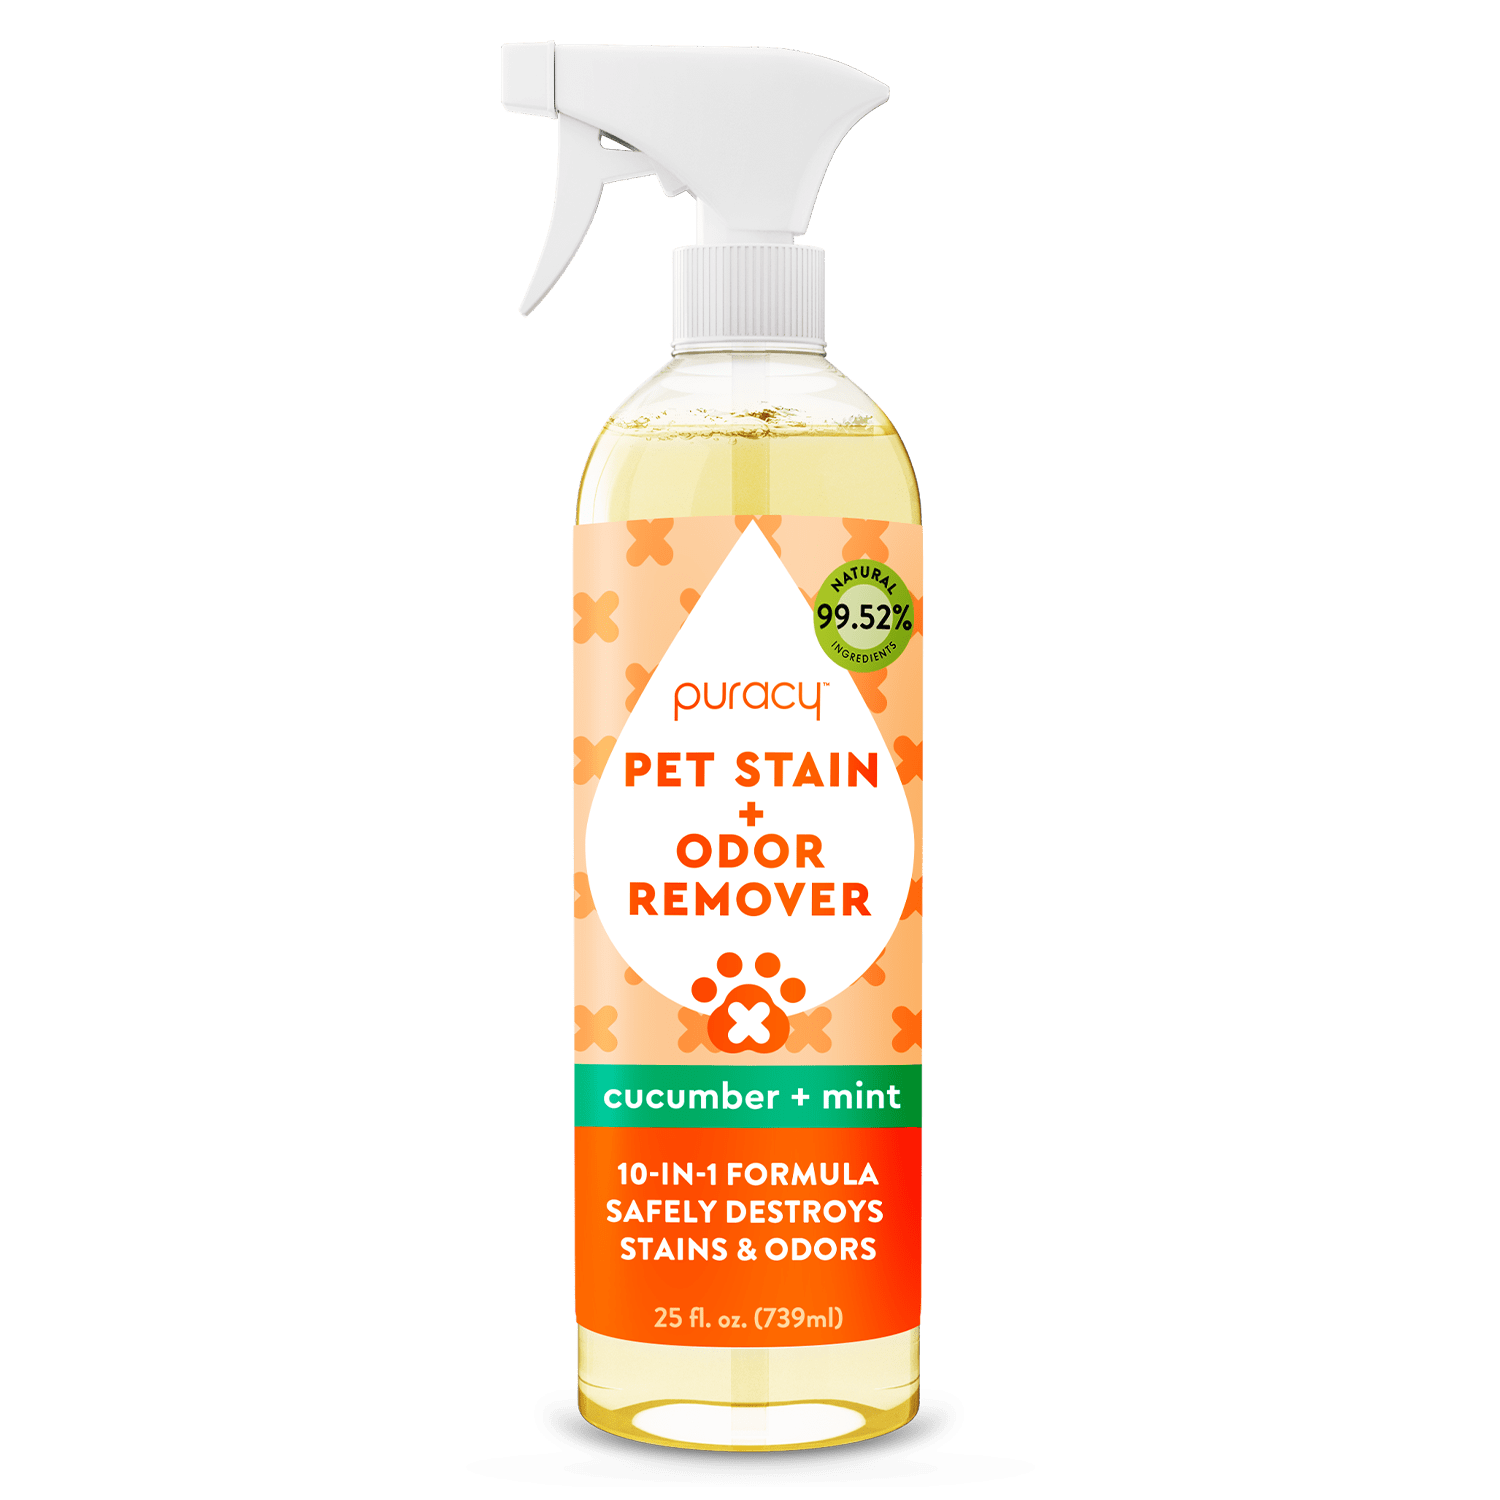 All-Natural Mattress Cleaner to Remove Urine Stains & Odors